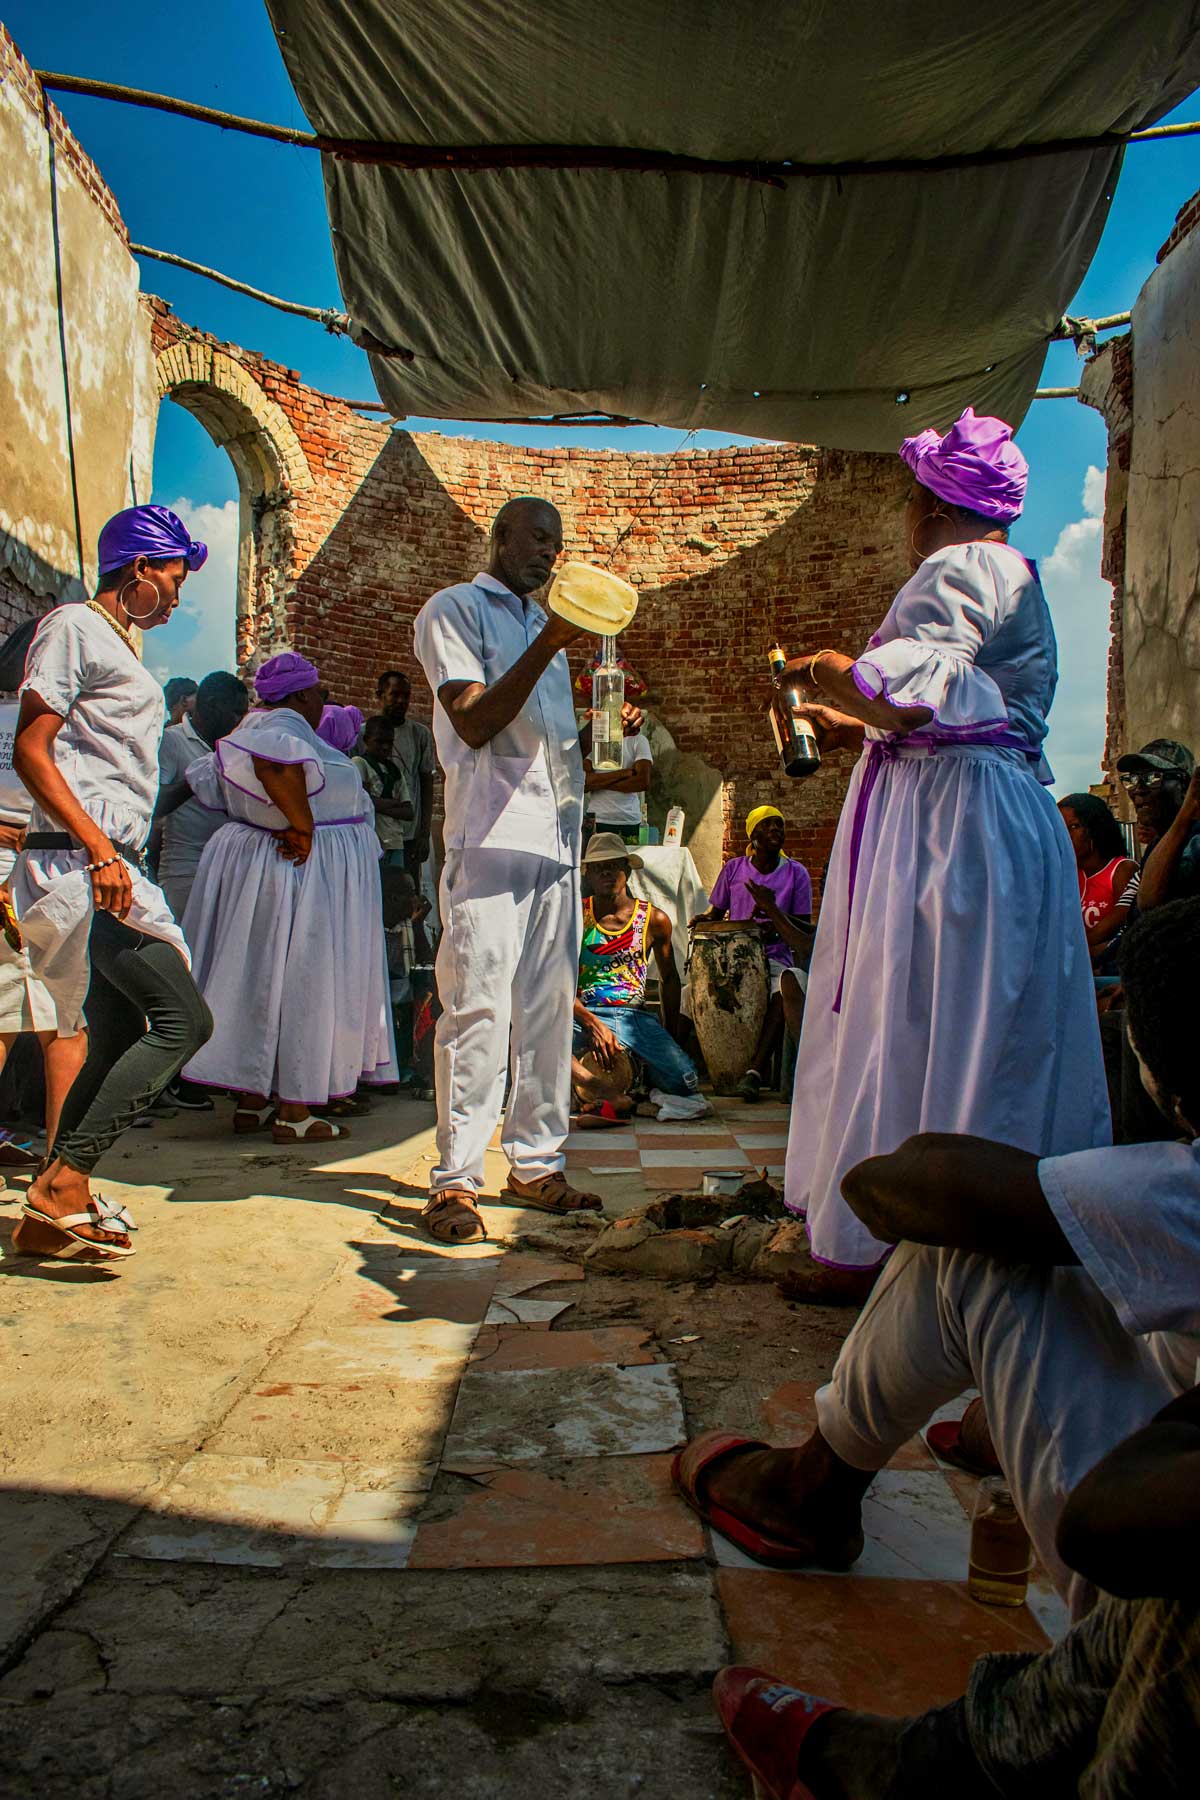 haitian vodou practitioners wearing white filling a transparant bottle with liquid